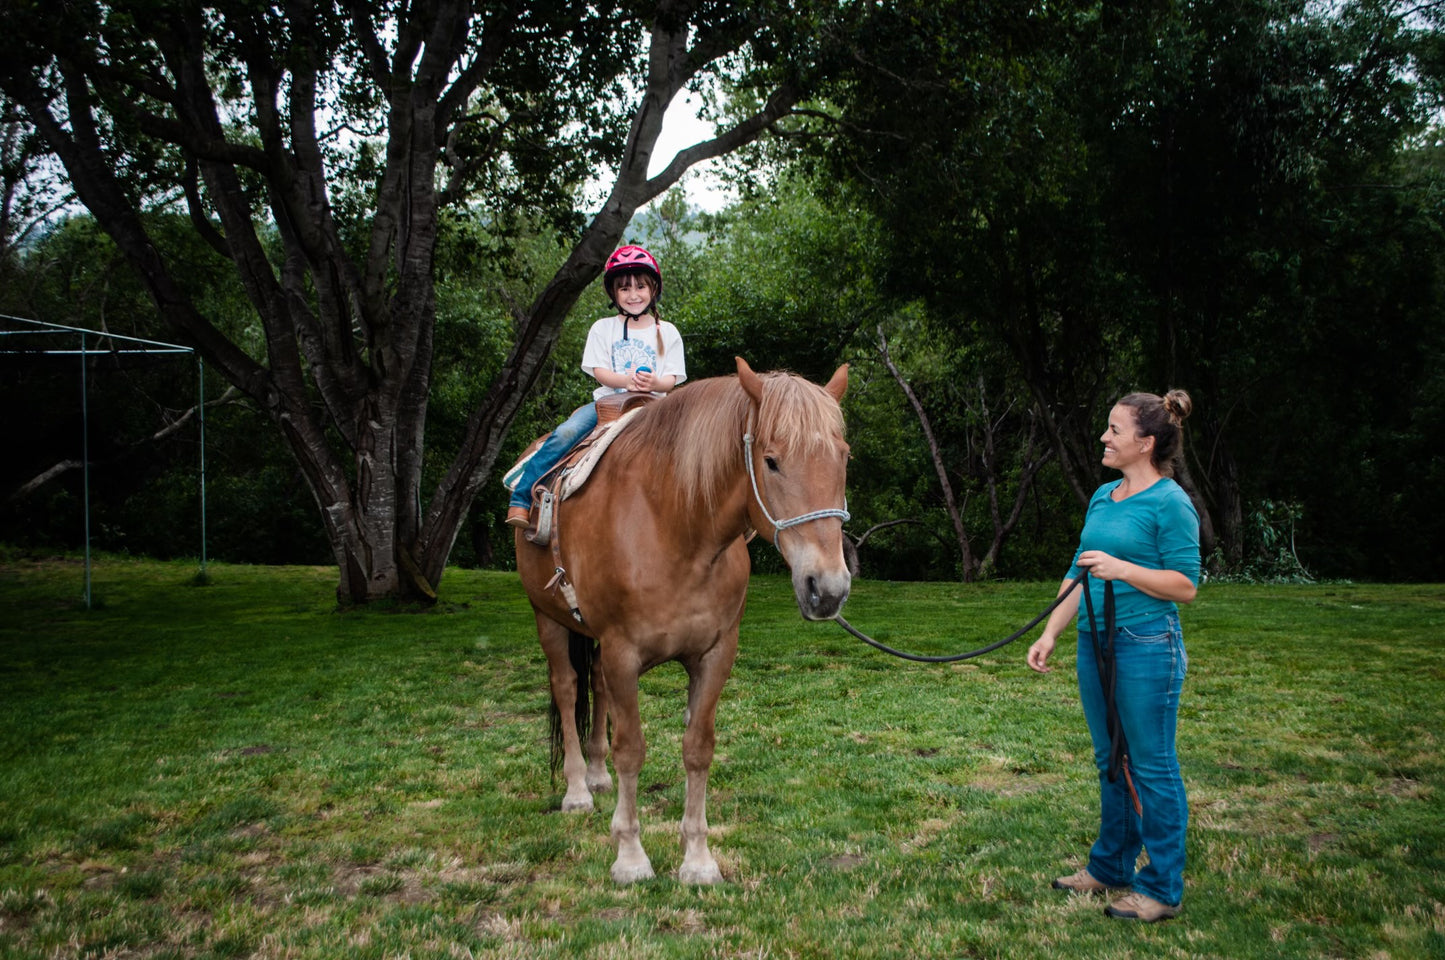 Giddy-Up Gathering: Children's Horse Experience (20 Minute - $40)